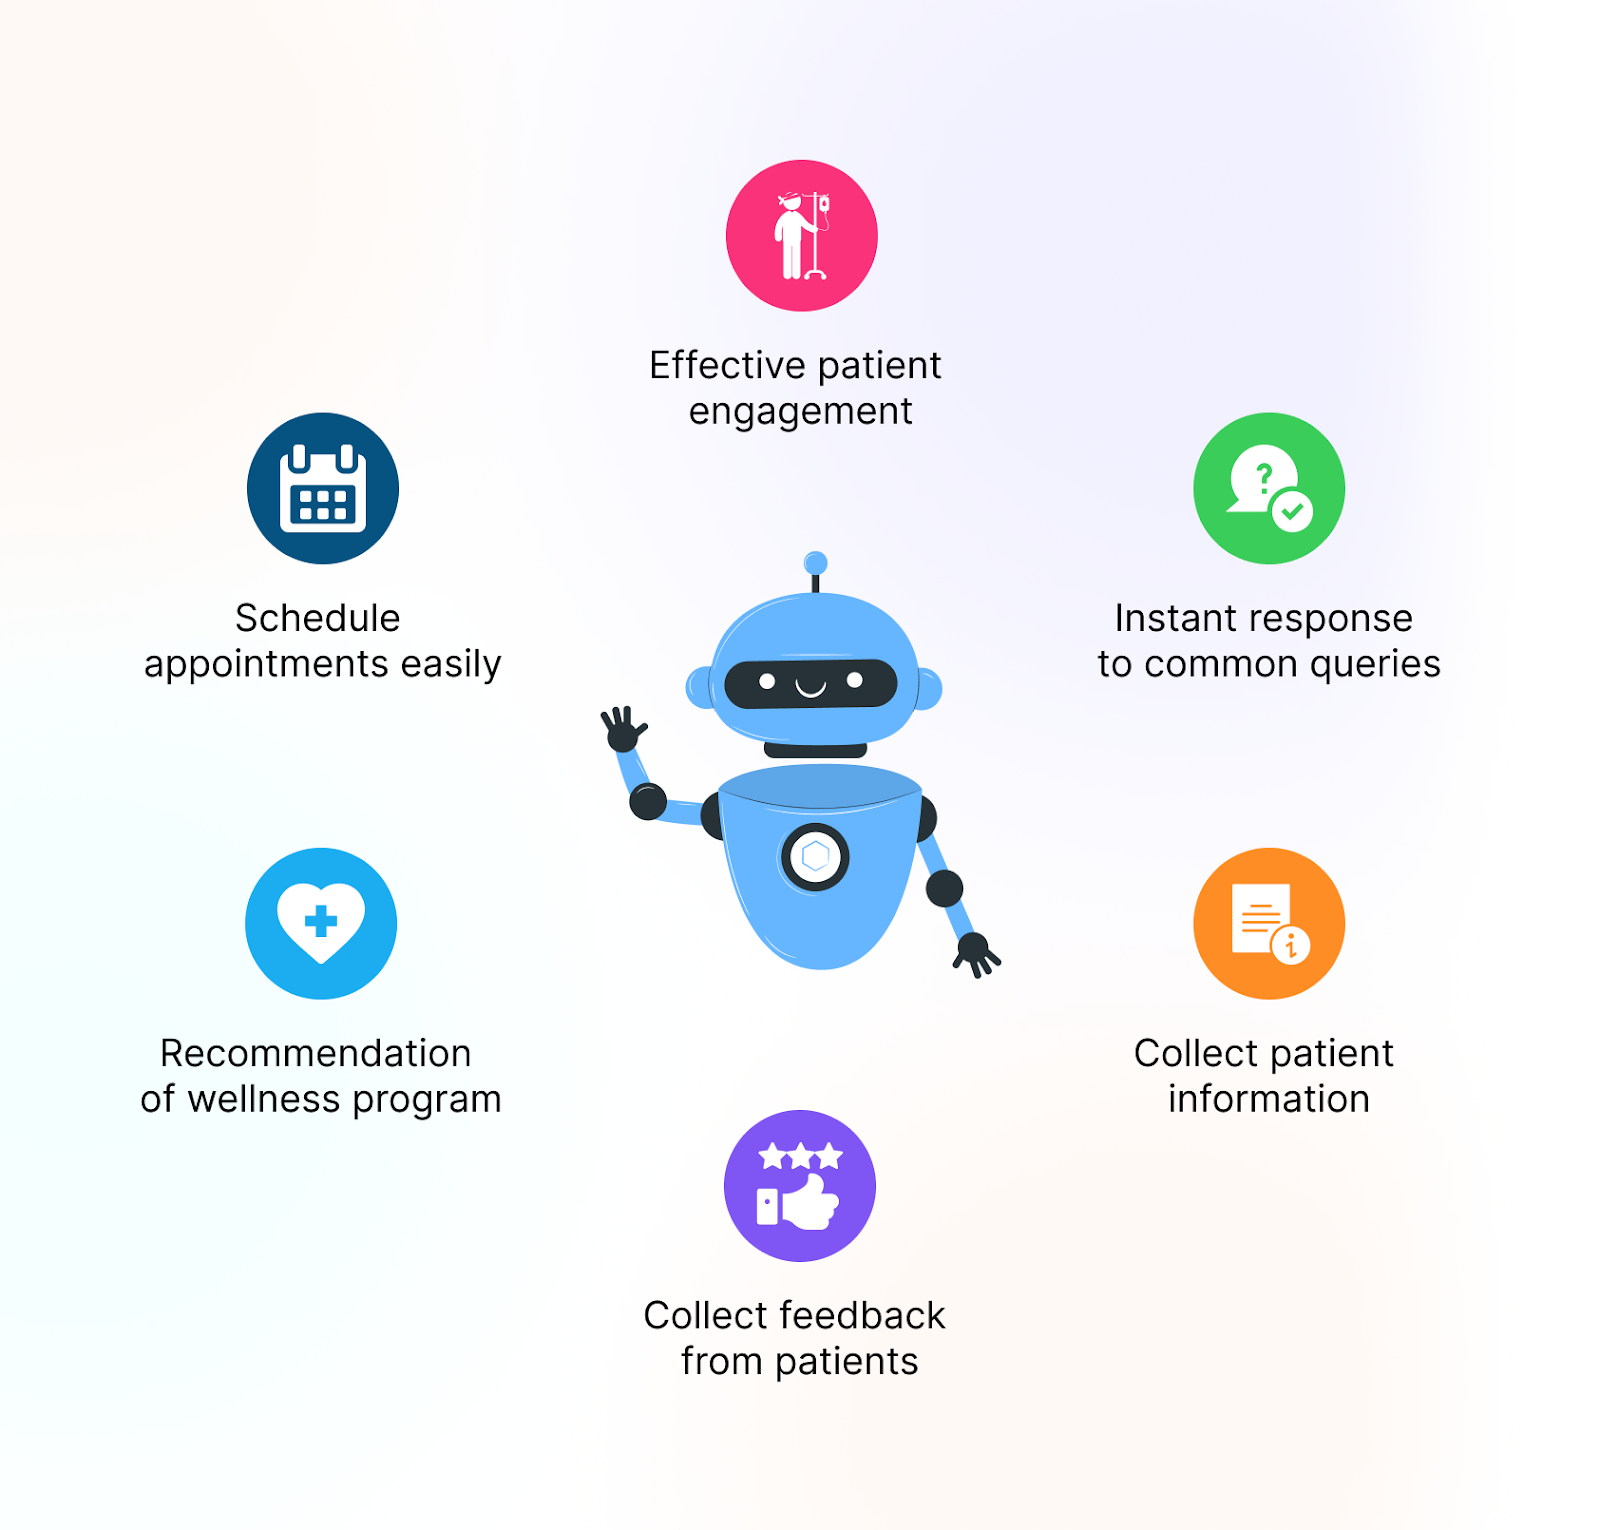 Effective patient engagementInstant response to common queriesCollect patient informationCollect feedback from patientsRecommendation of wellness programSchedule appointments easily